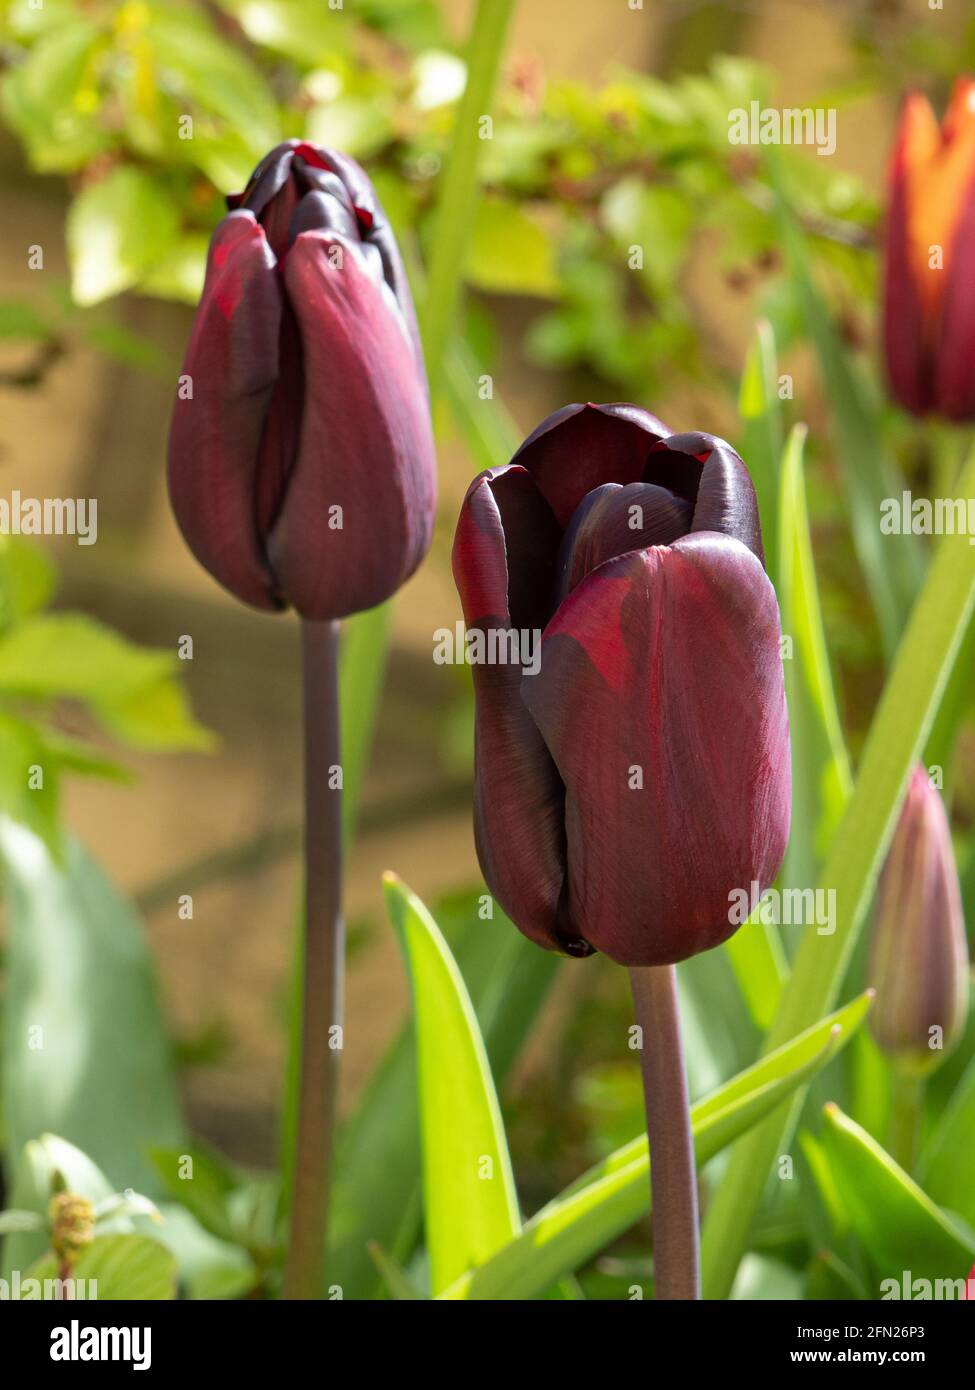 A close up of two ebony coloured flowers of Tulip Continental Stock Photo